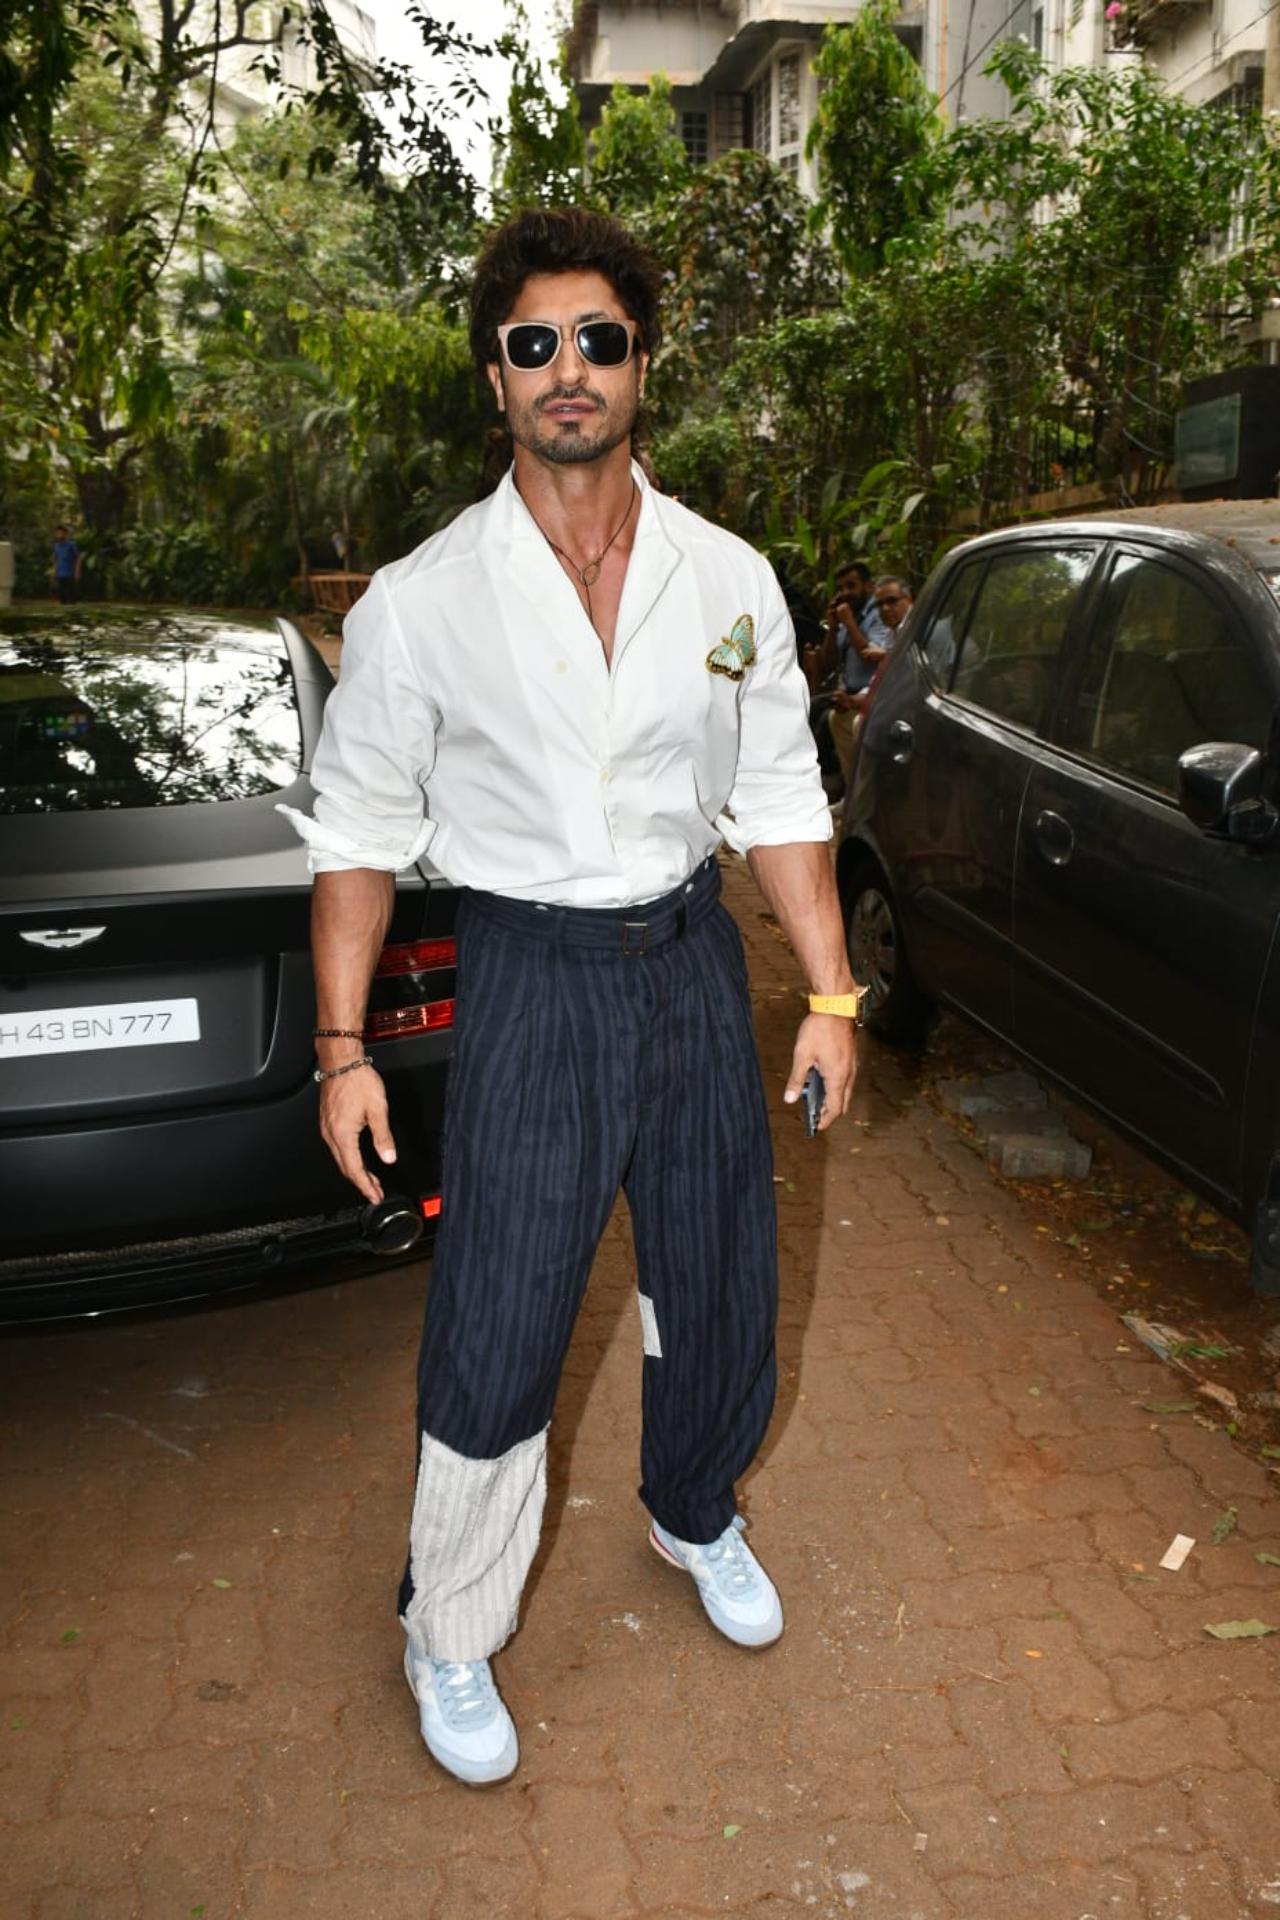 Vidyut Jammwal was in an experimental mood as the actor went for a white shirt, striped blue pants and white knee-length boots. He had black shades on and happily posed for the paparazzi